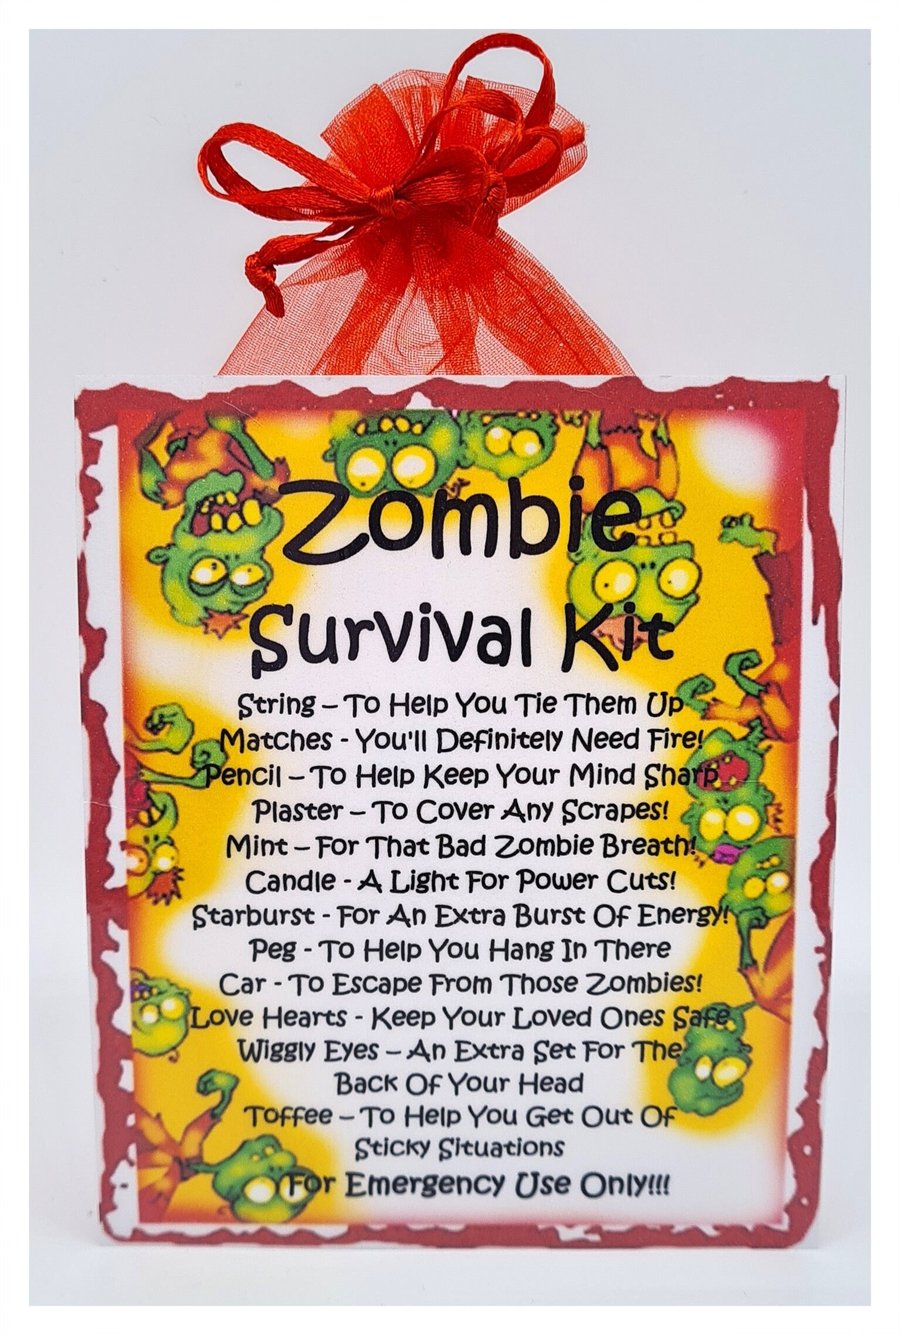 Zombie Survival Kit - Fun novelty gift and greetings card all in one !